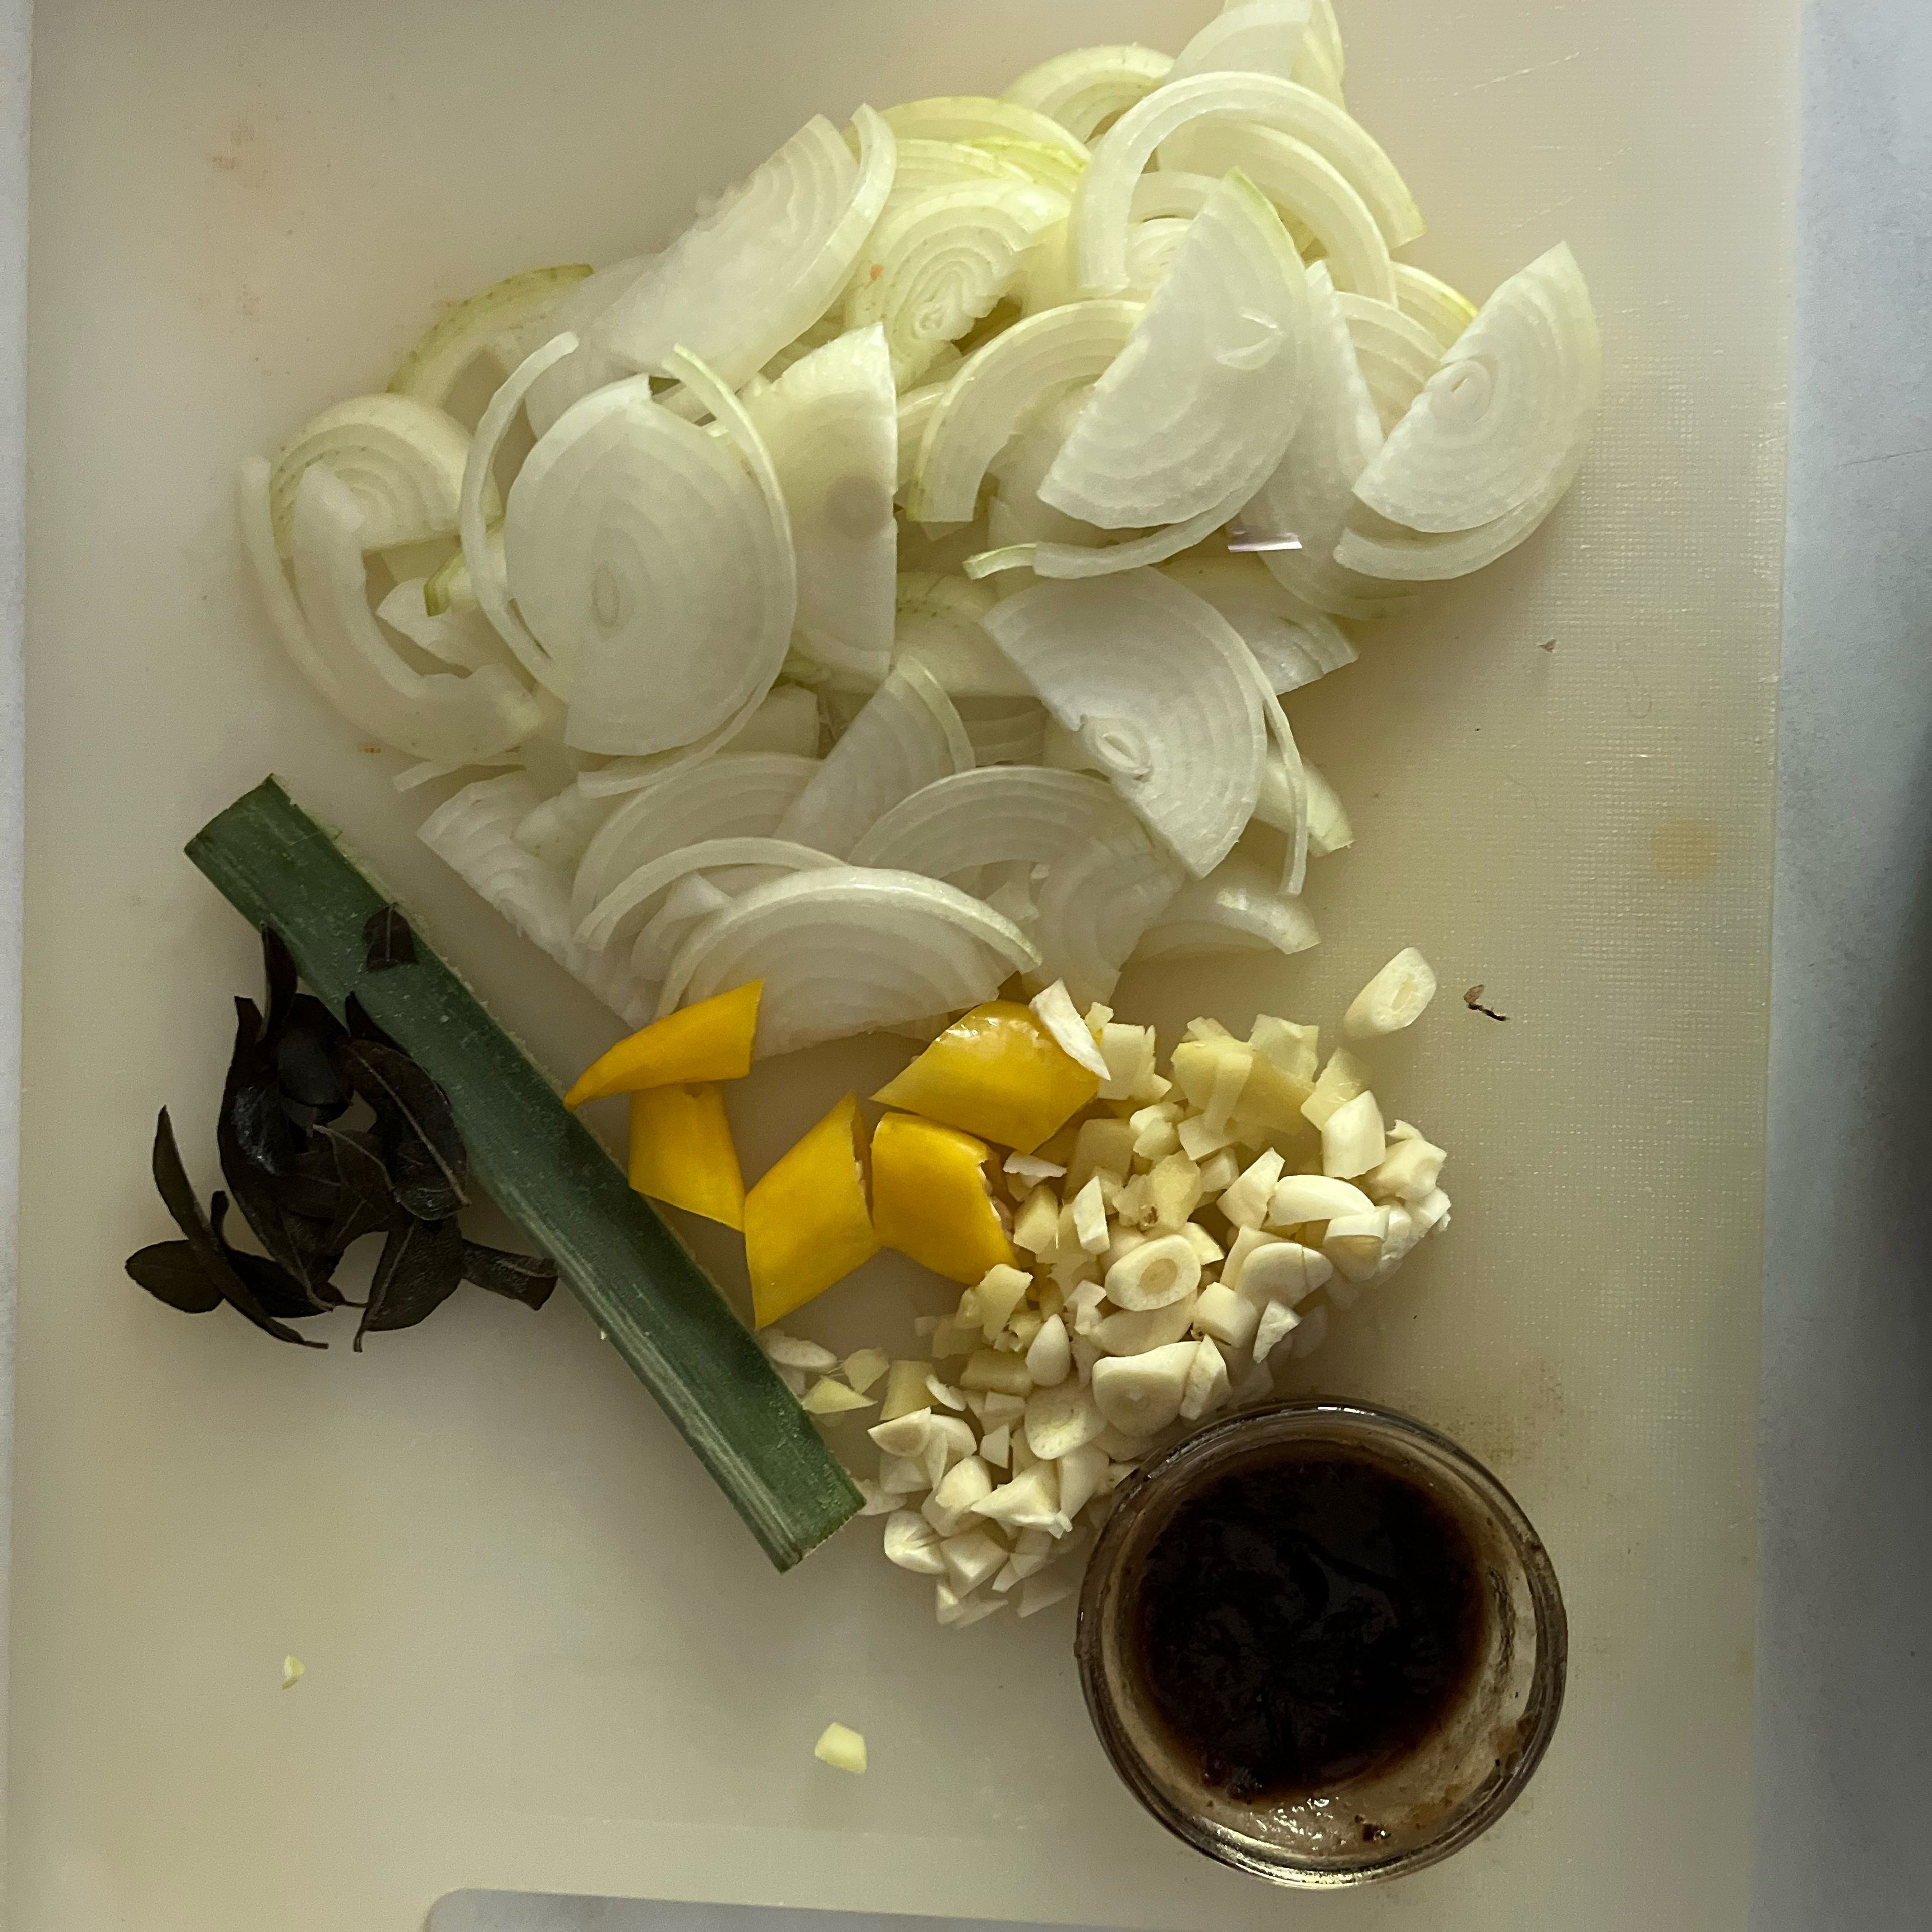 Slice onions, chop garlic, ginger and chili. Peel and soak tamarind pulp in a table spoon of water. Remove curry leaves from sprig and cut a piece of pandan leave.